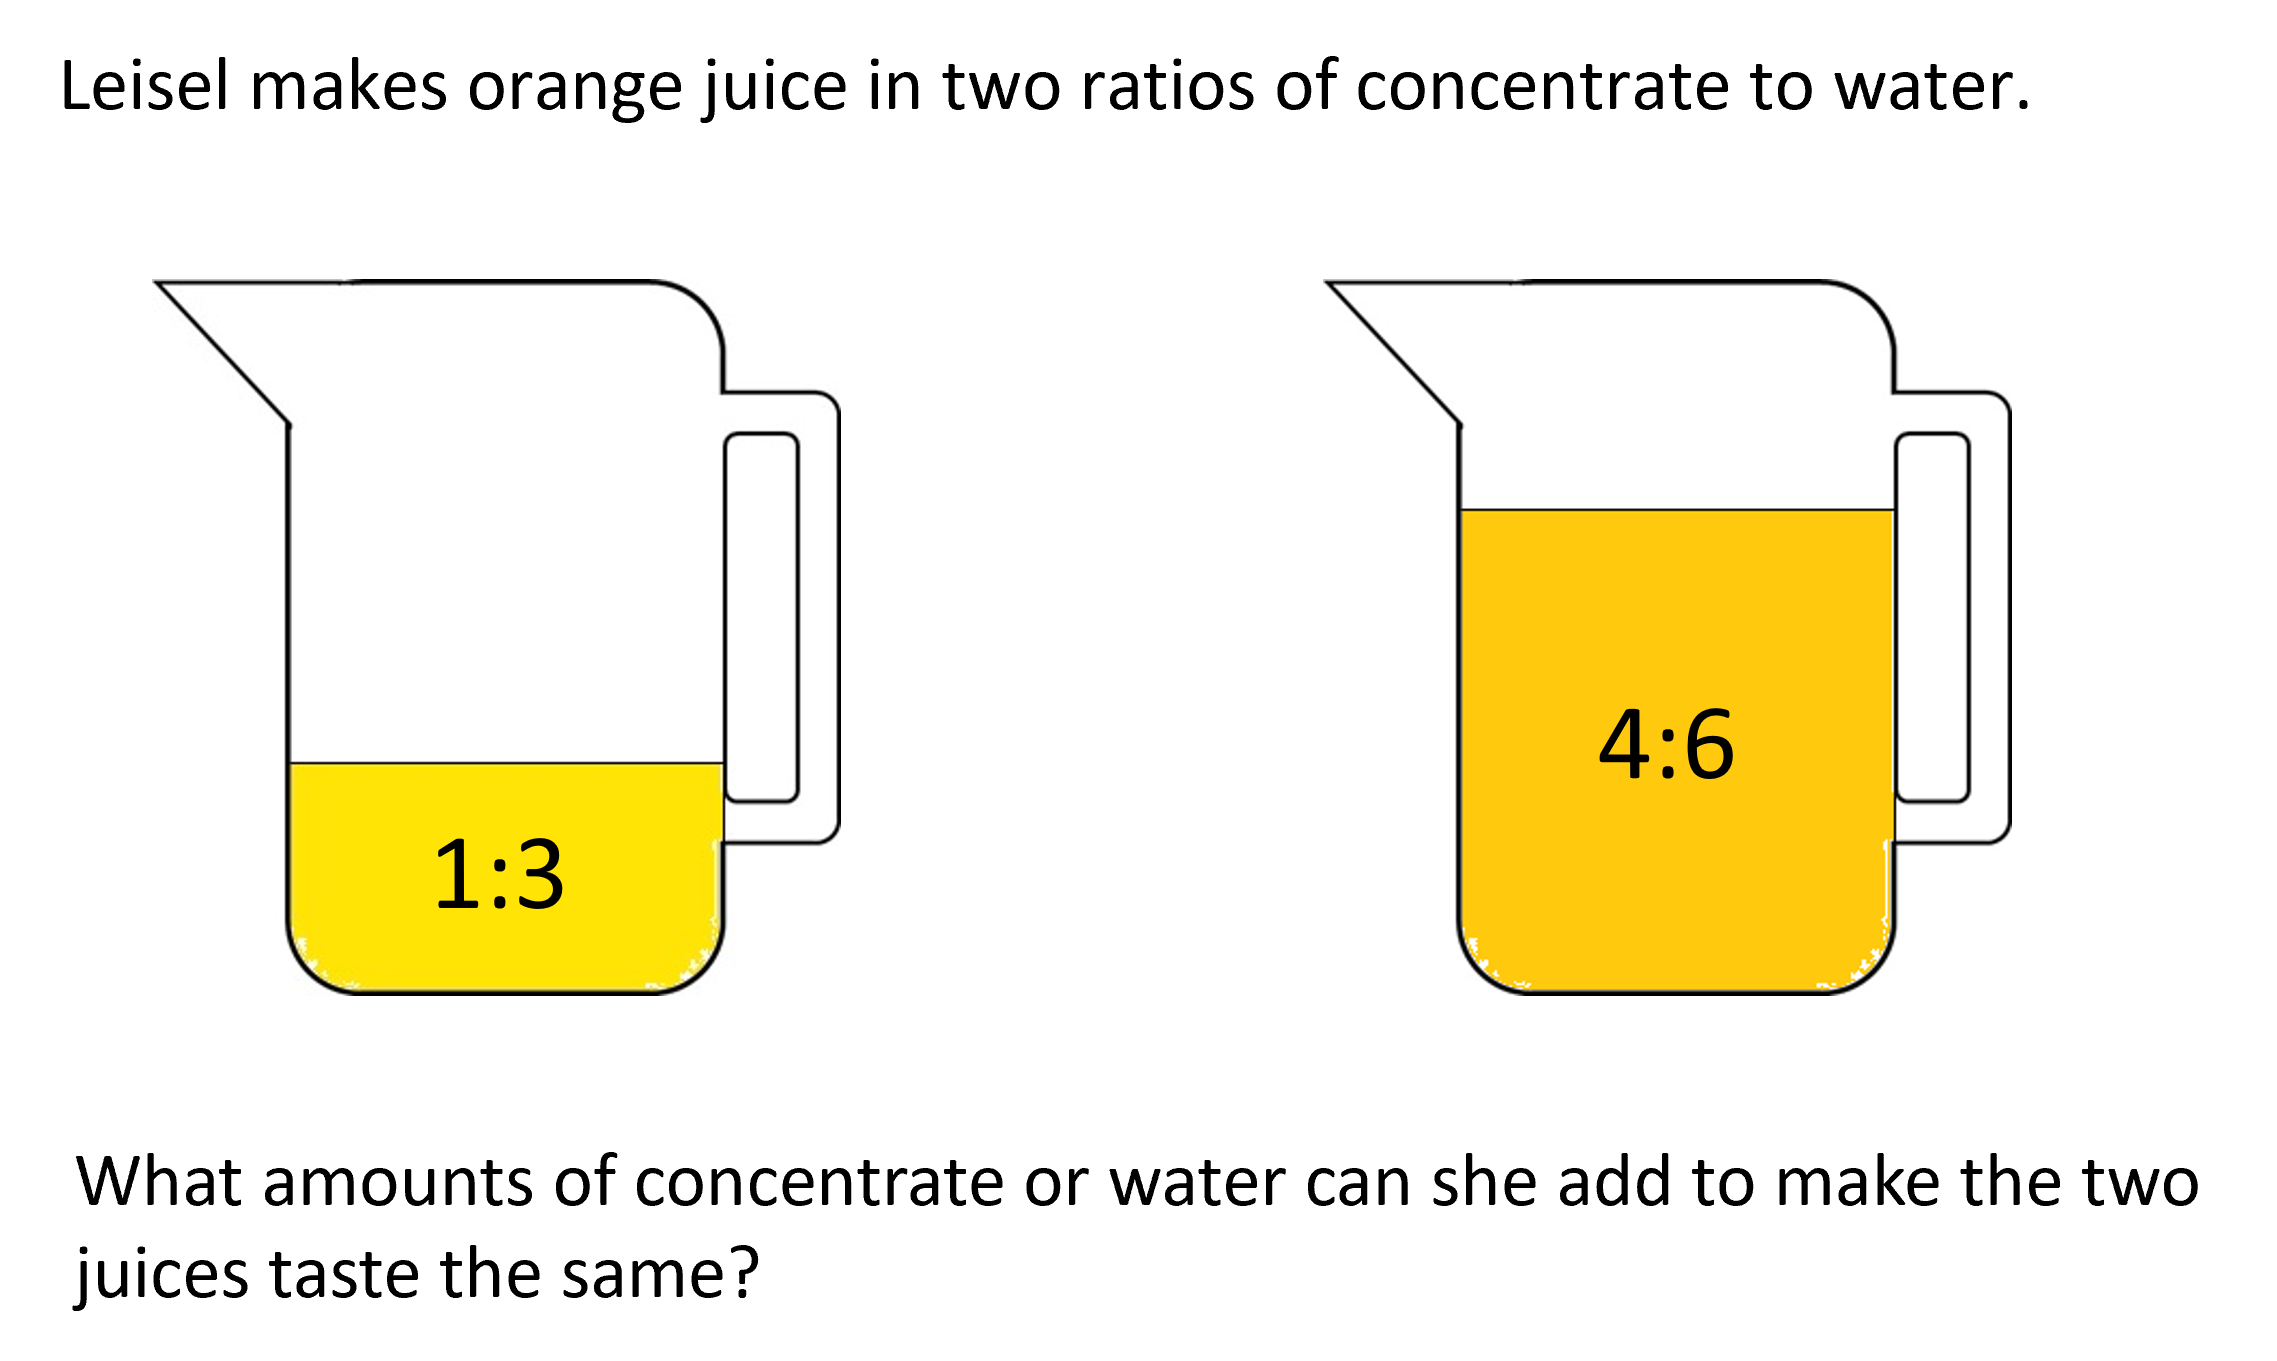 Image of ratios problem: Leisel makes orange juice in two ratios of concentrate to water (1:3 and 4:6). What amounts of concentrate or water can she add to make the two juices taste the same?